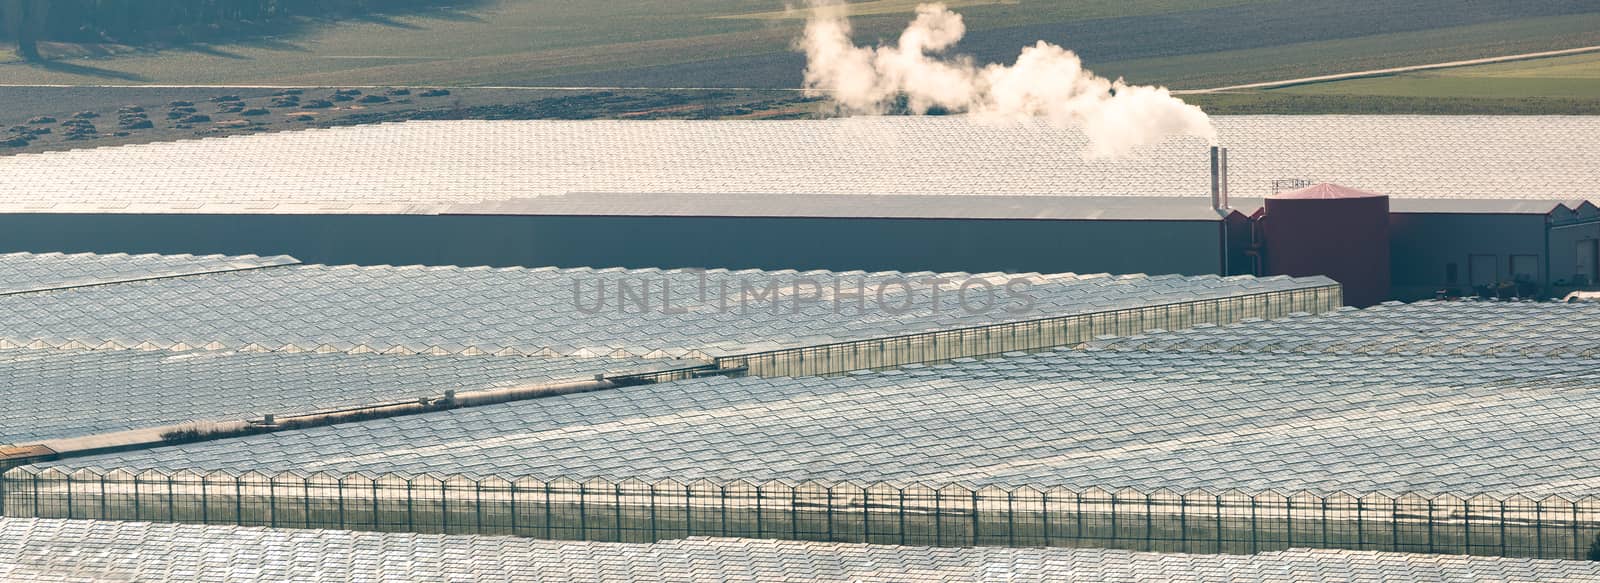 Aerial view of a large agricultural greenhouse compound.